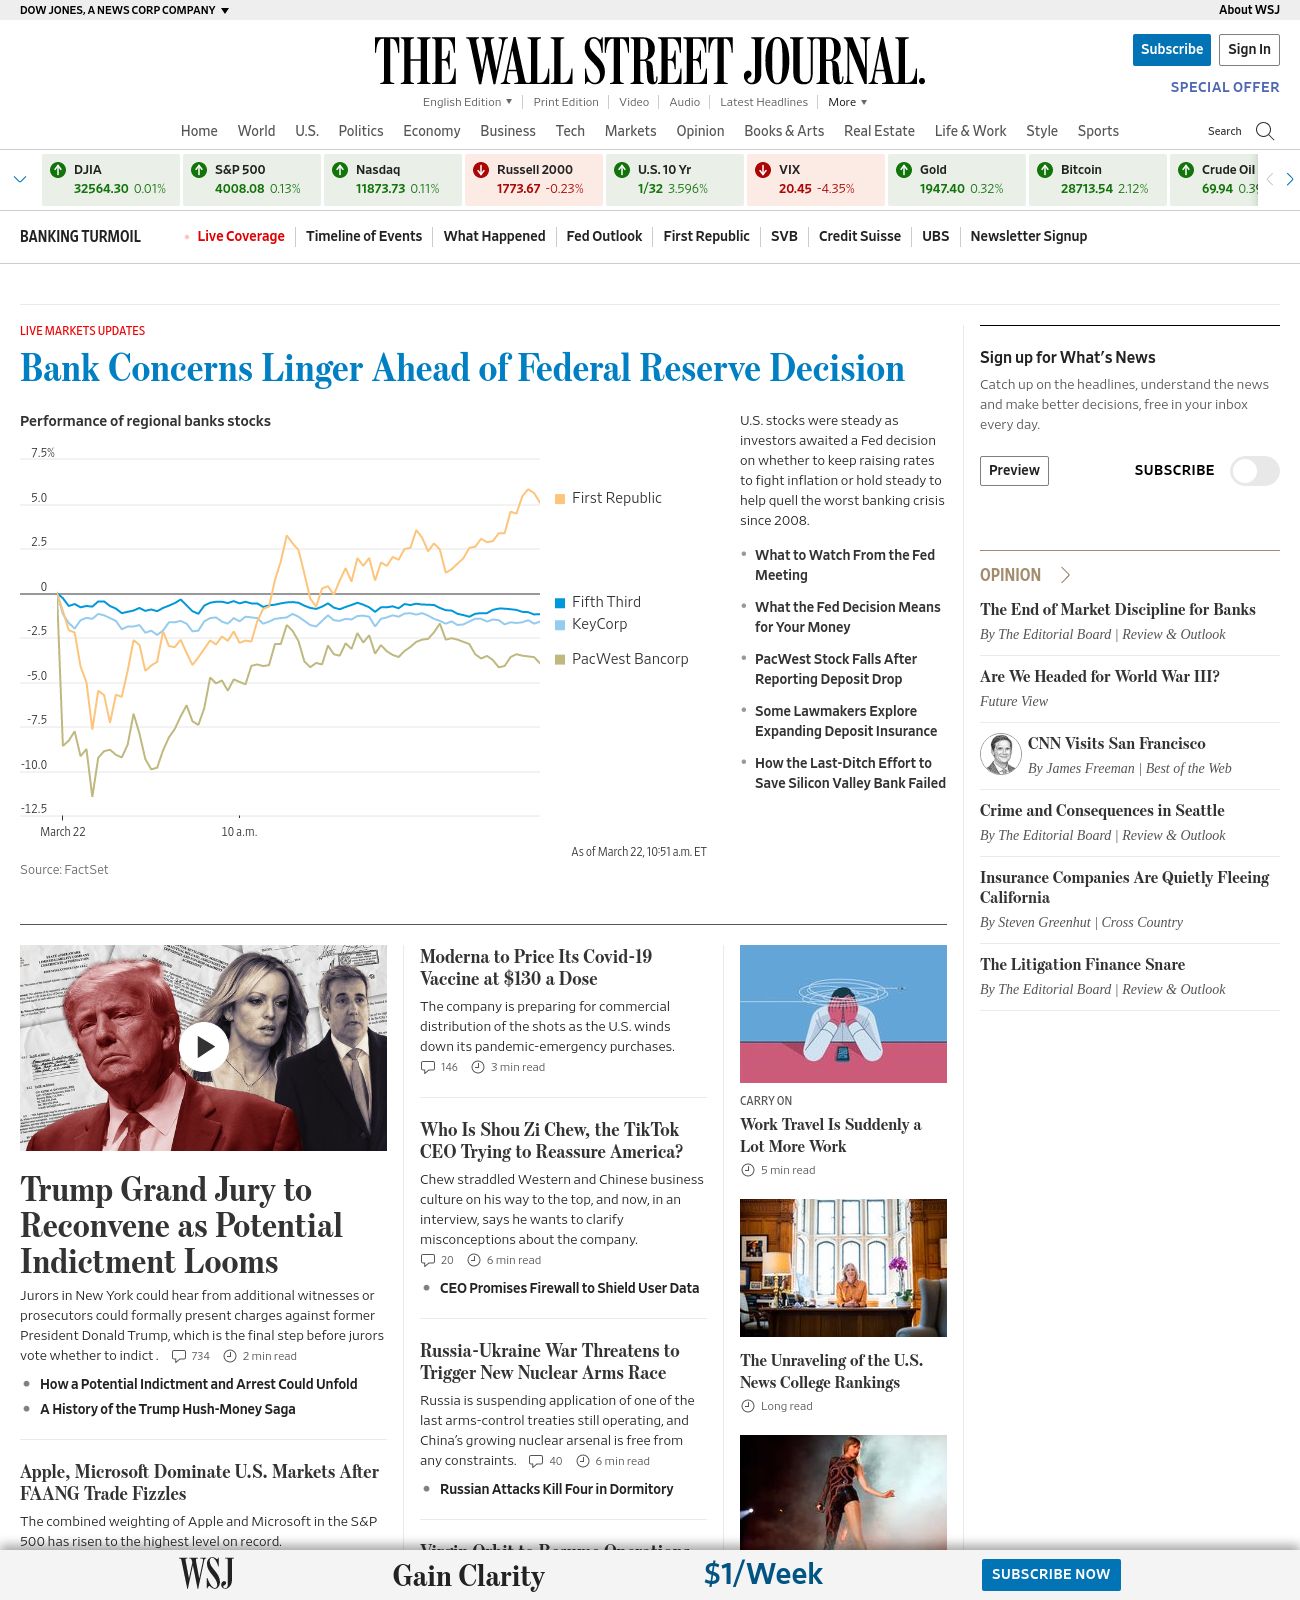 Wall Street Journal at 2023-03-22 10:58:45-04:00 local time